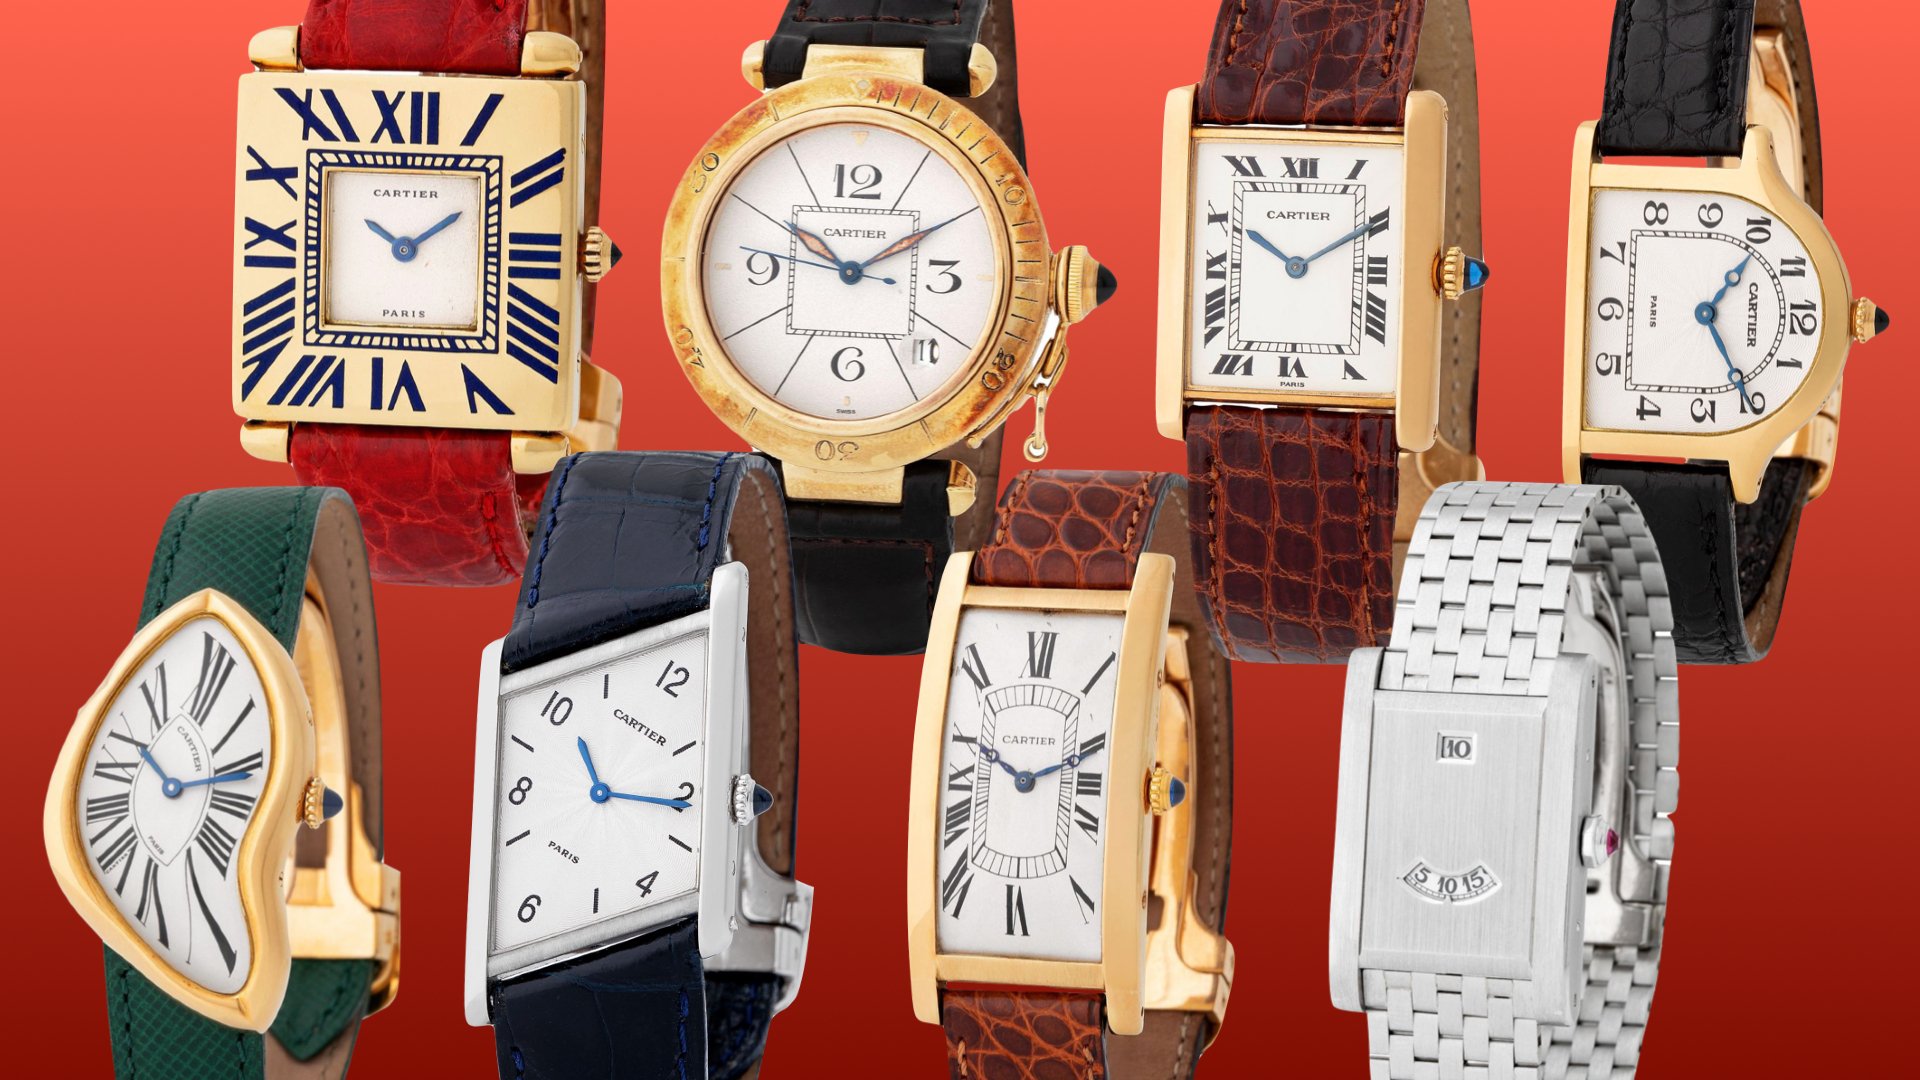 5 Facts about the Cartier Tank: The Unisex Watch Classic